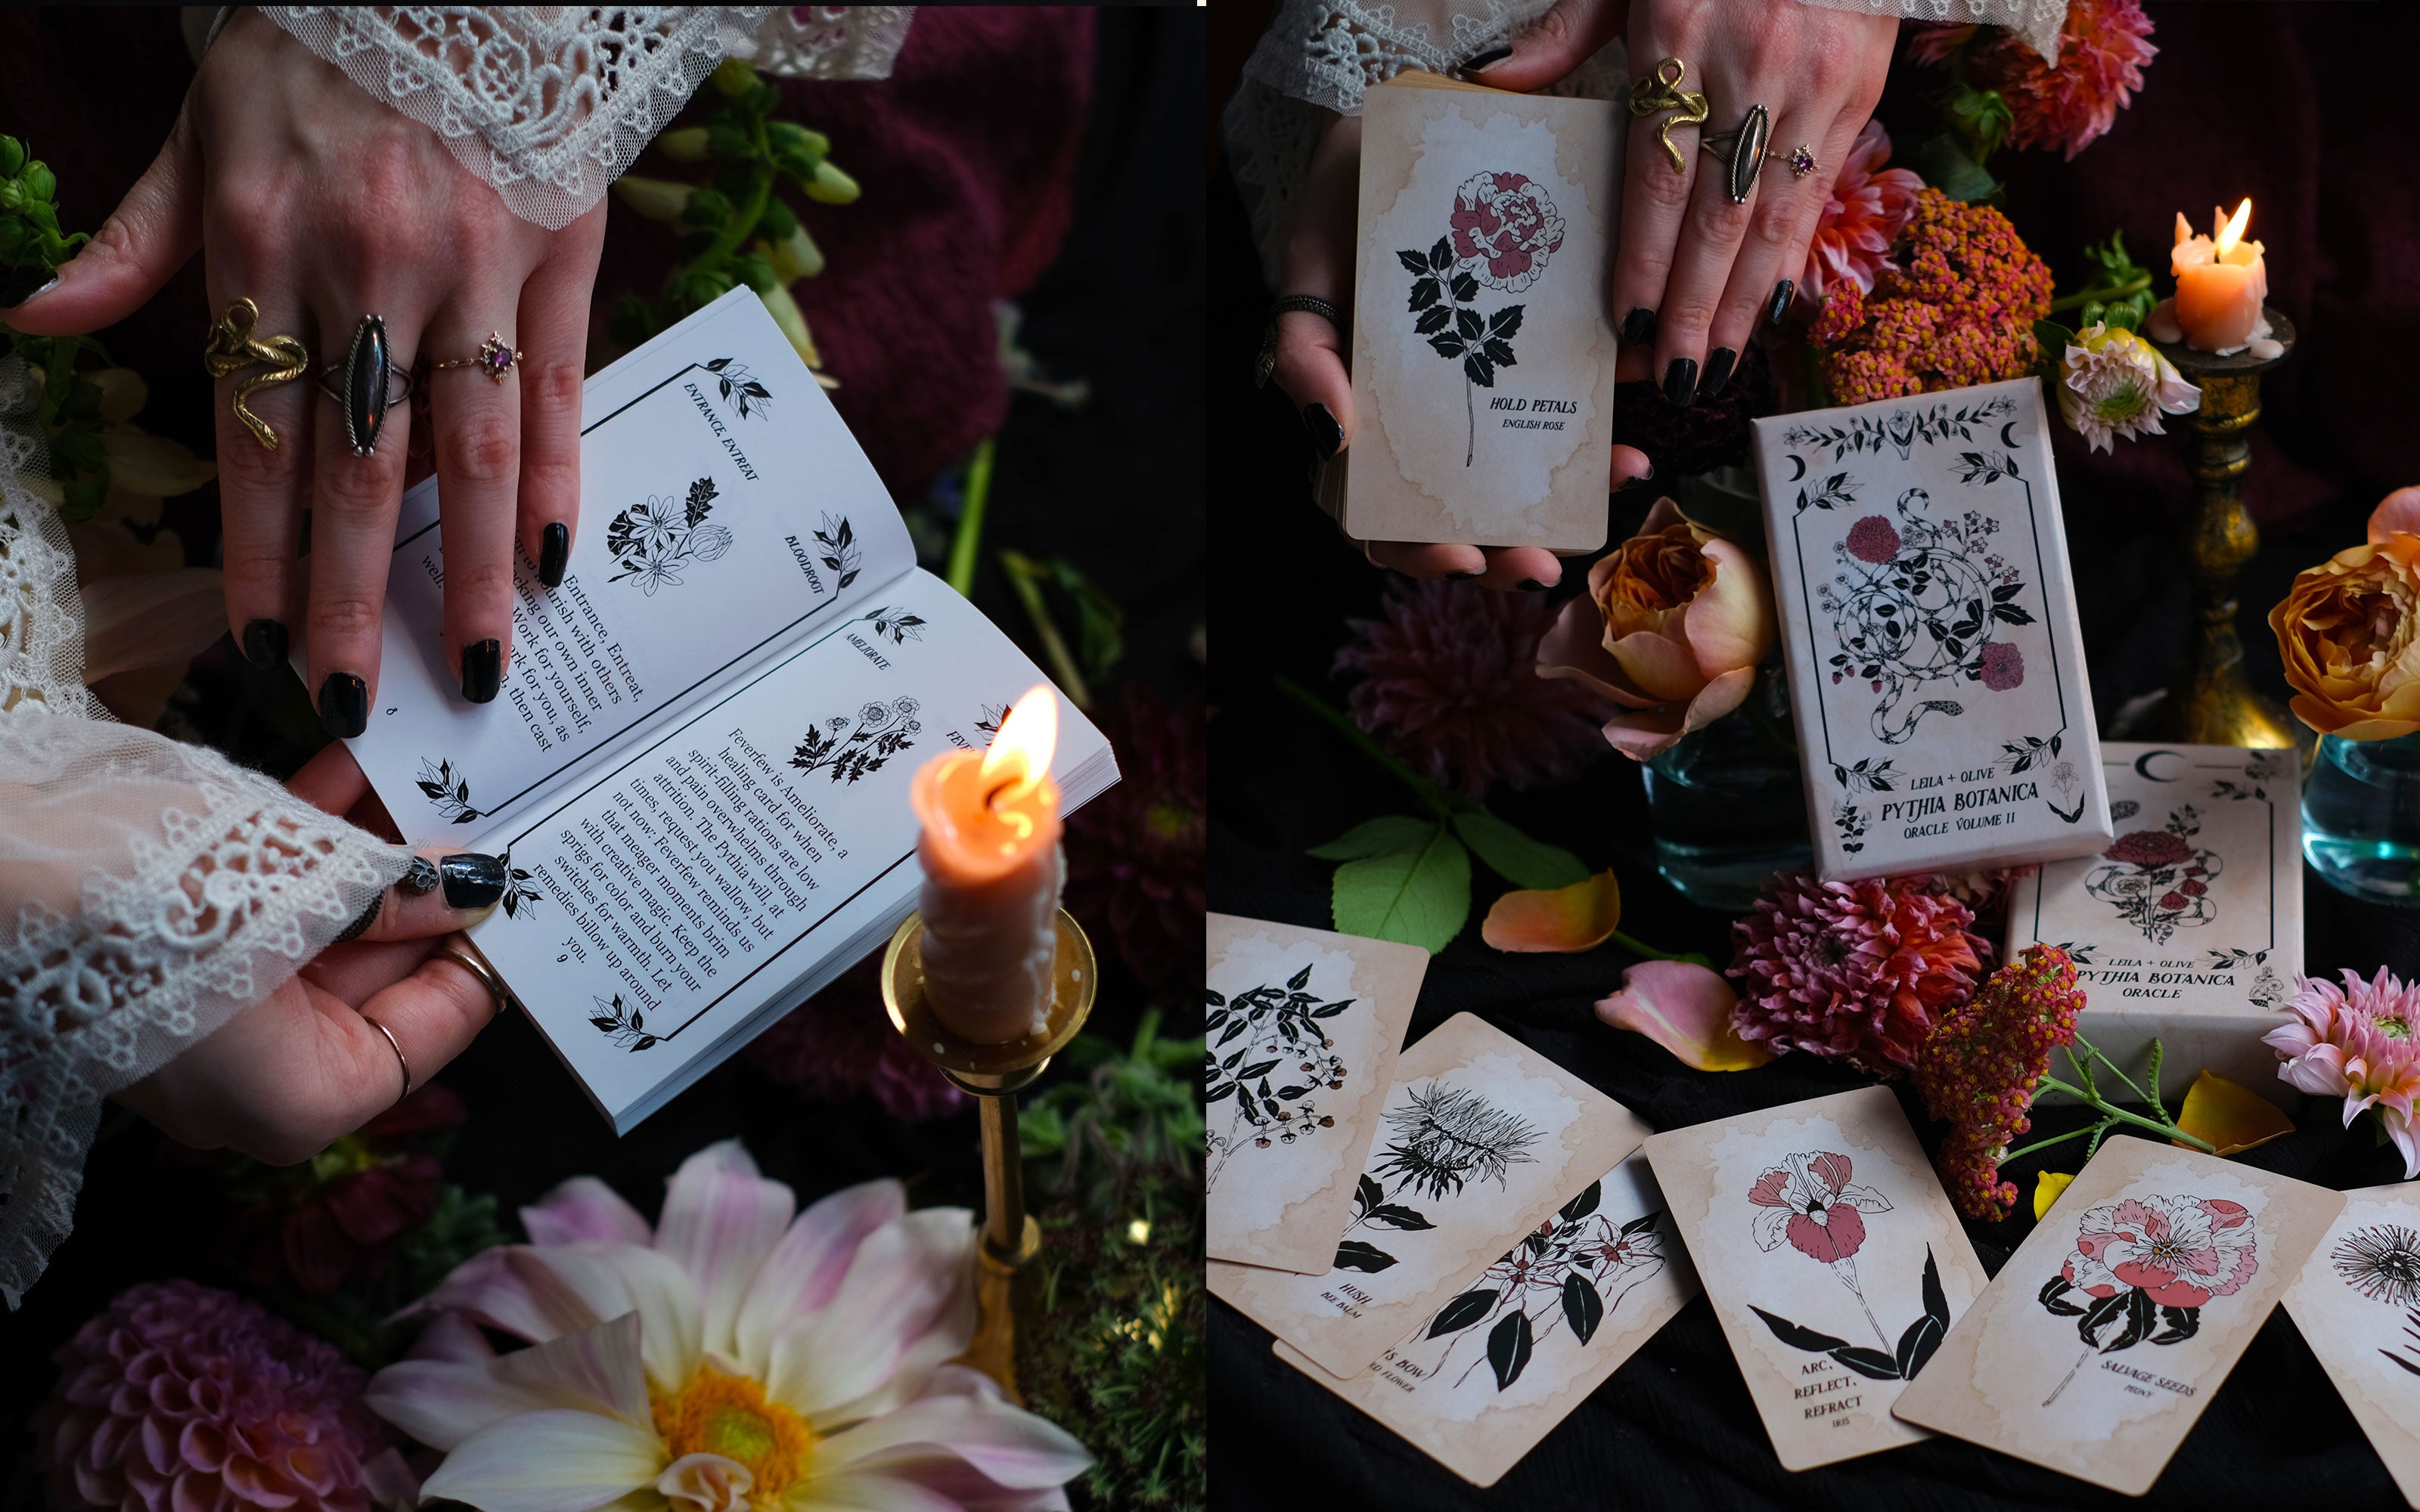 The original plant magic Botanical Oracle deck, Pythia Botanica is hand-illustrated, gilded in gold, rooted in mythology.